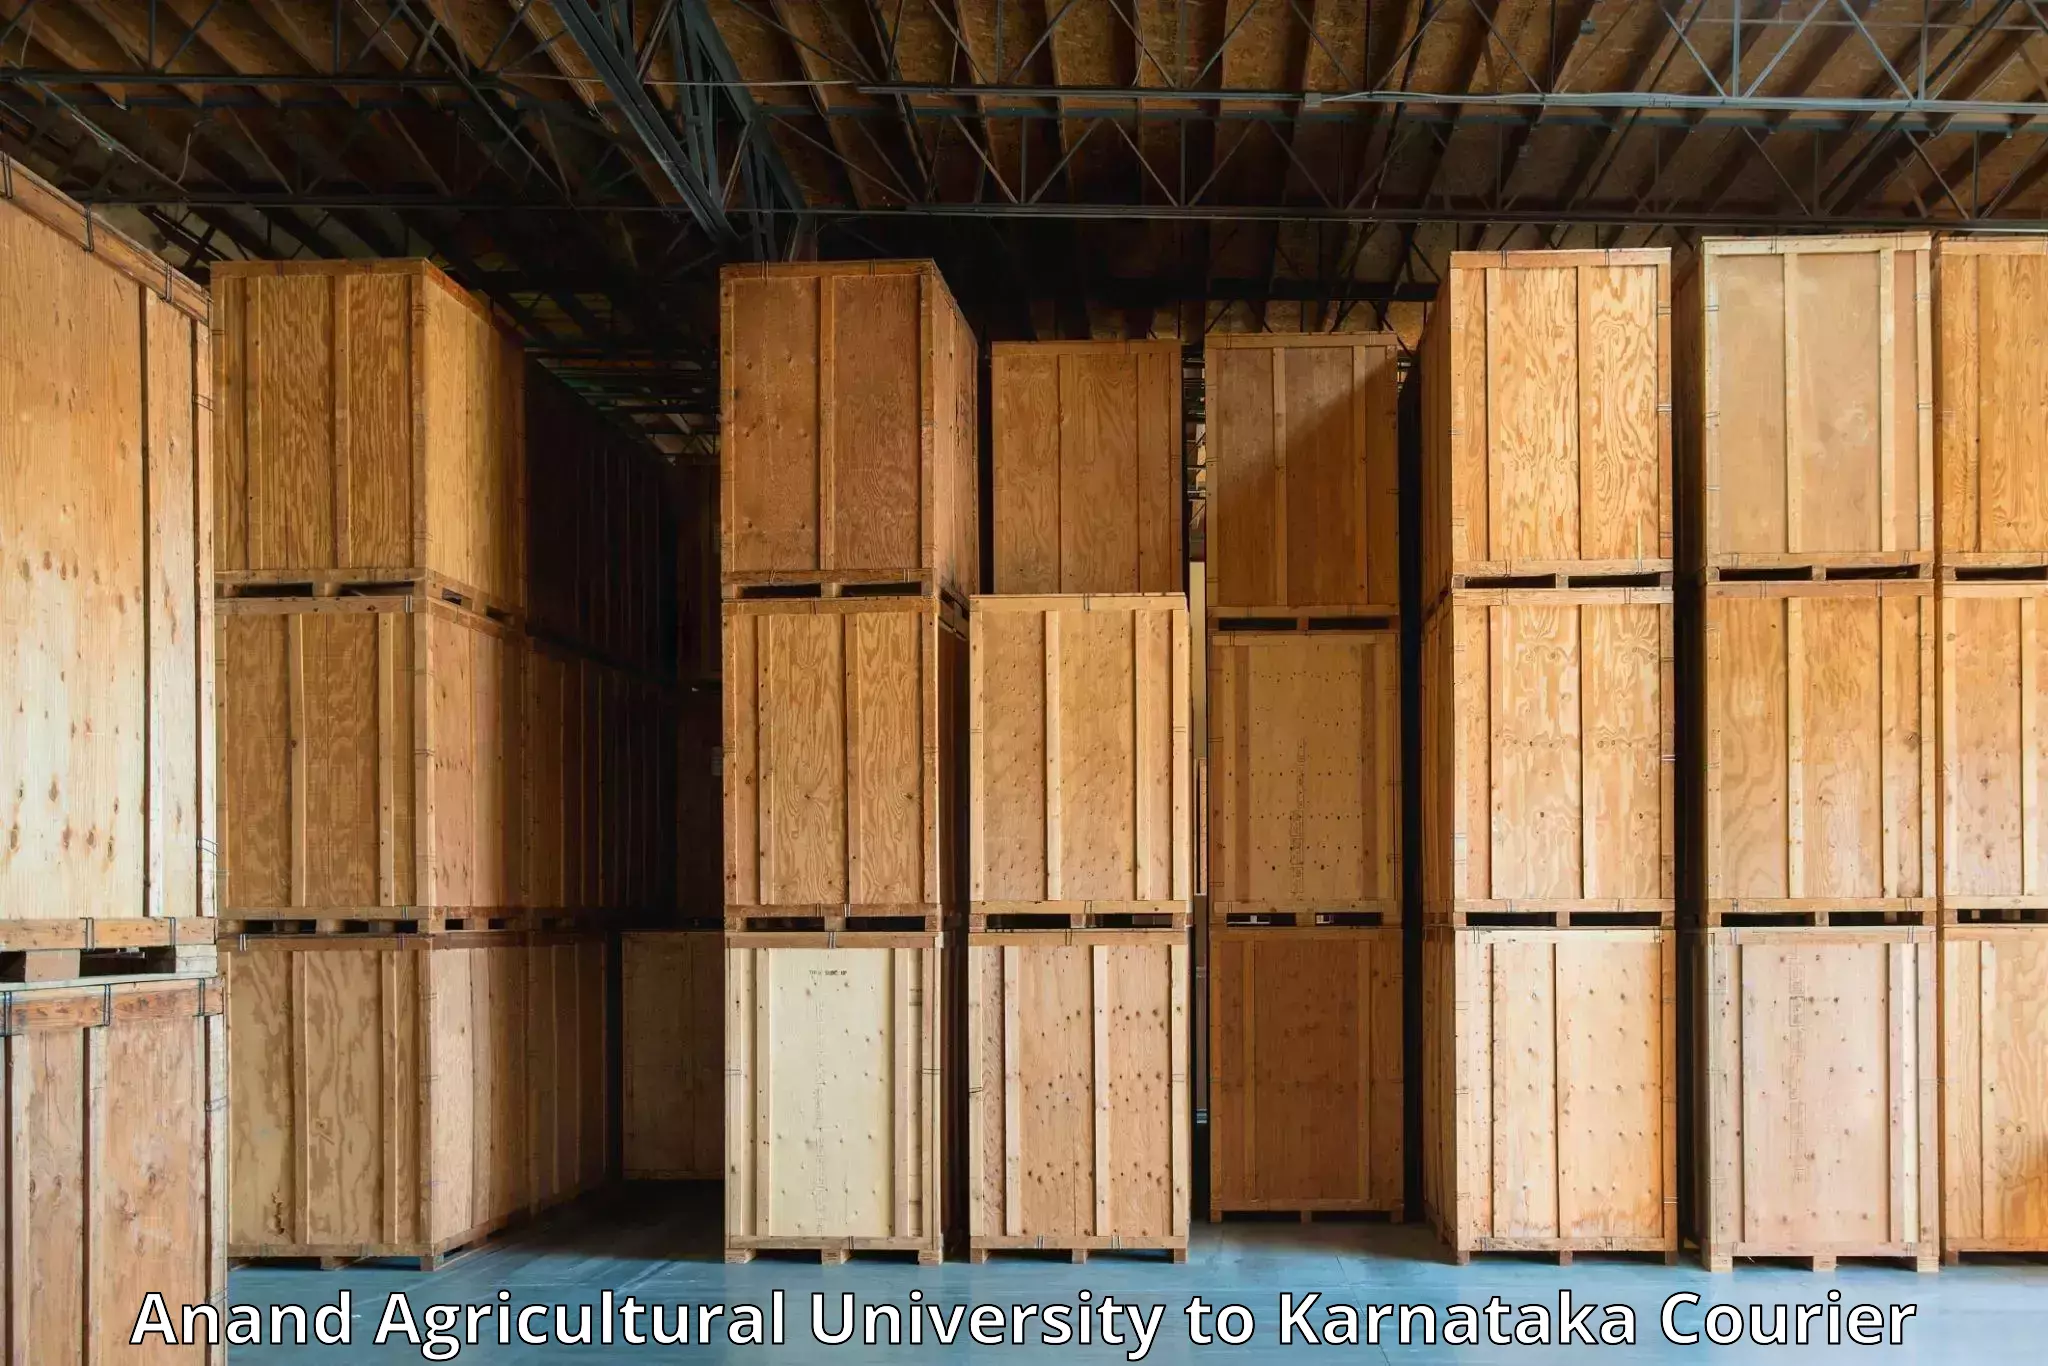 High-capacity parcel service Anand Agricultural University to Srirangapatna